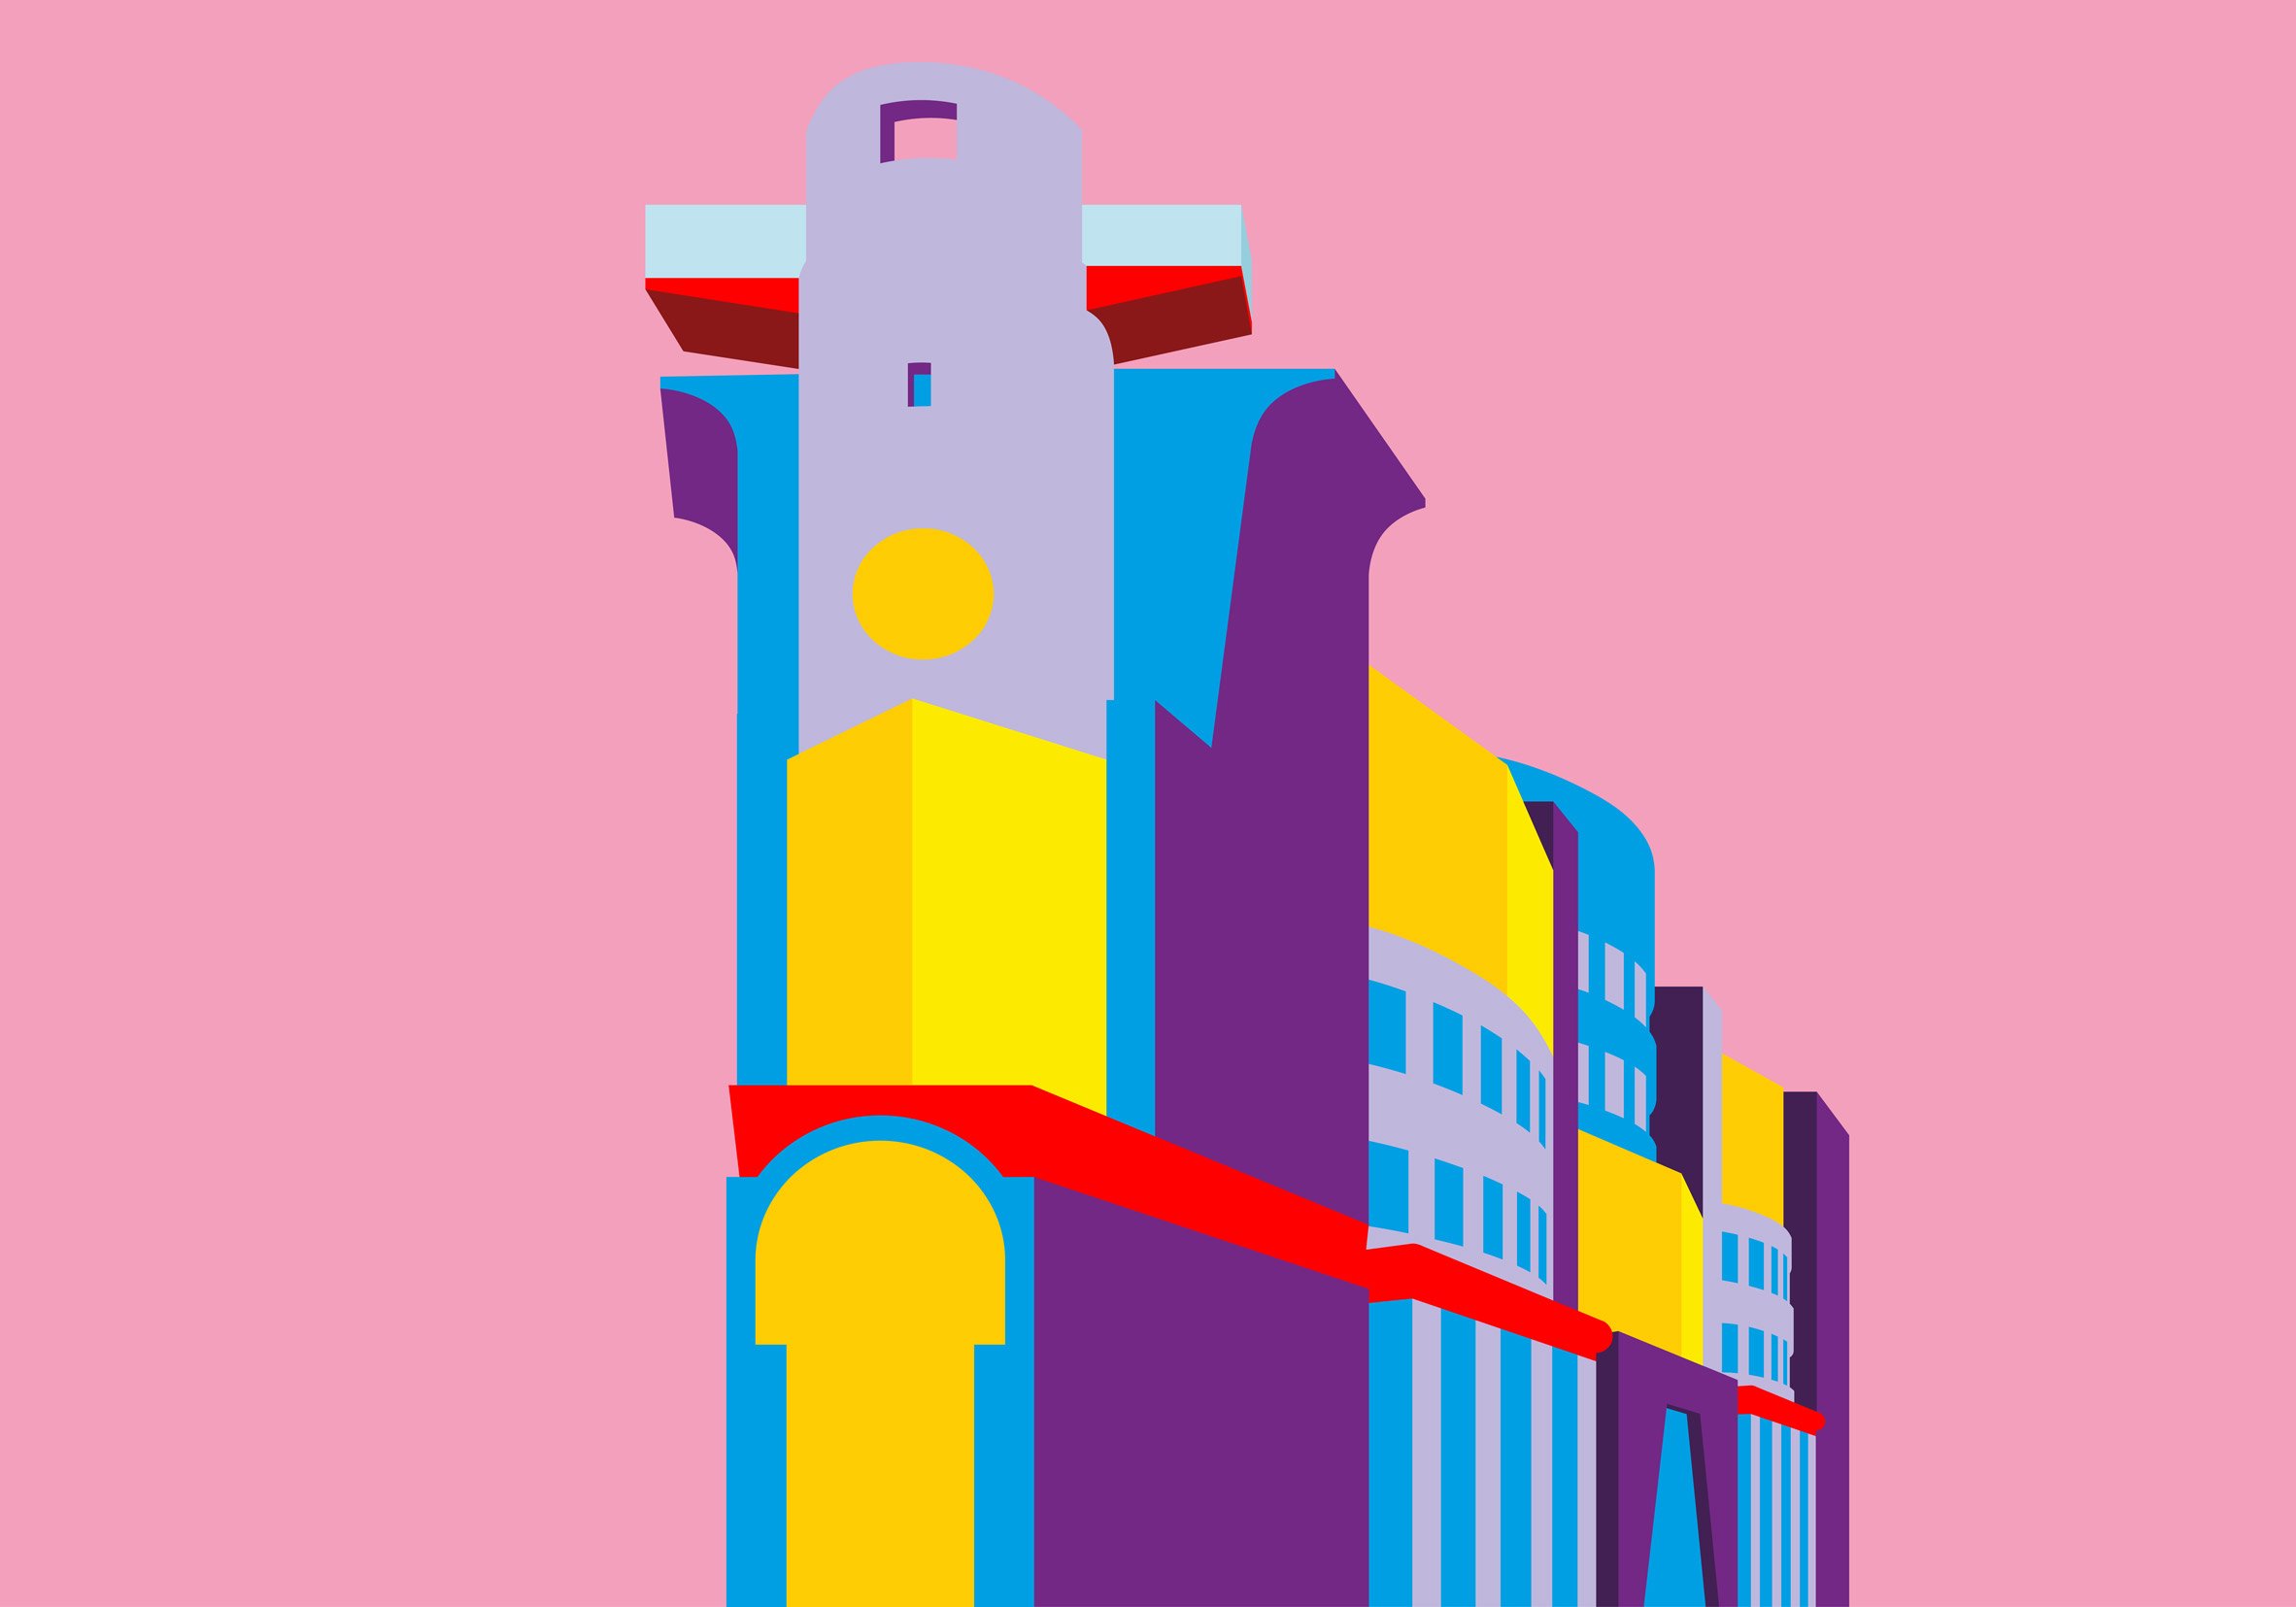 No 1 Poultry building illustrated in simple block shapes and colours